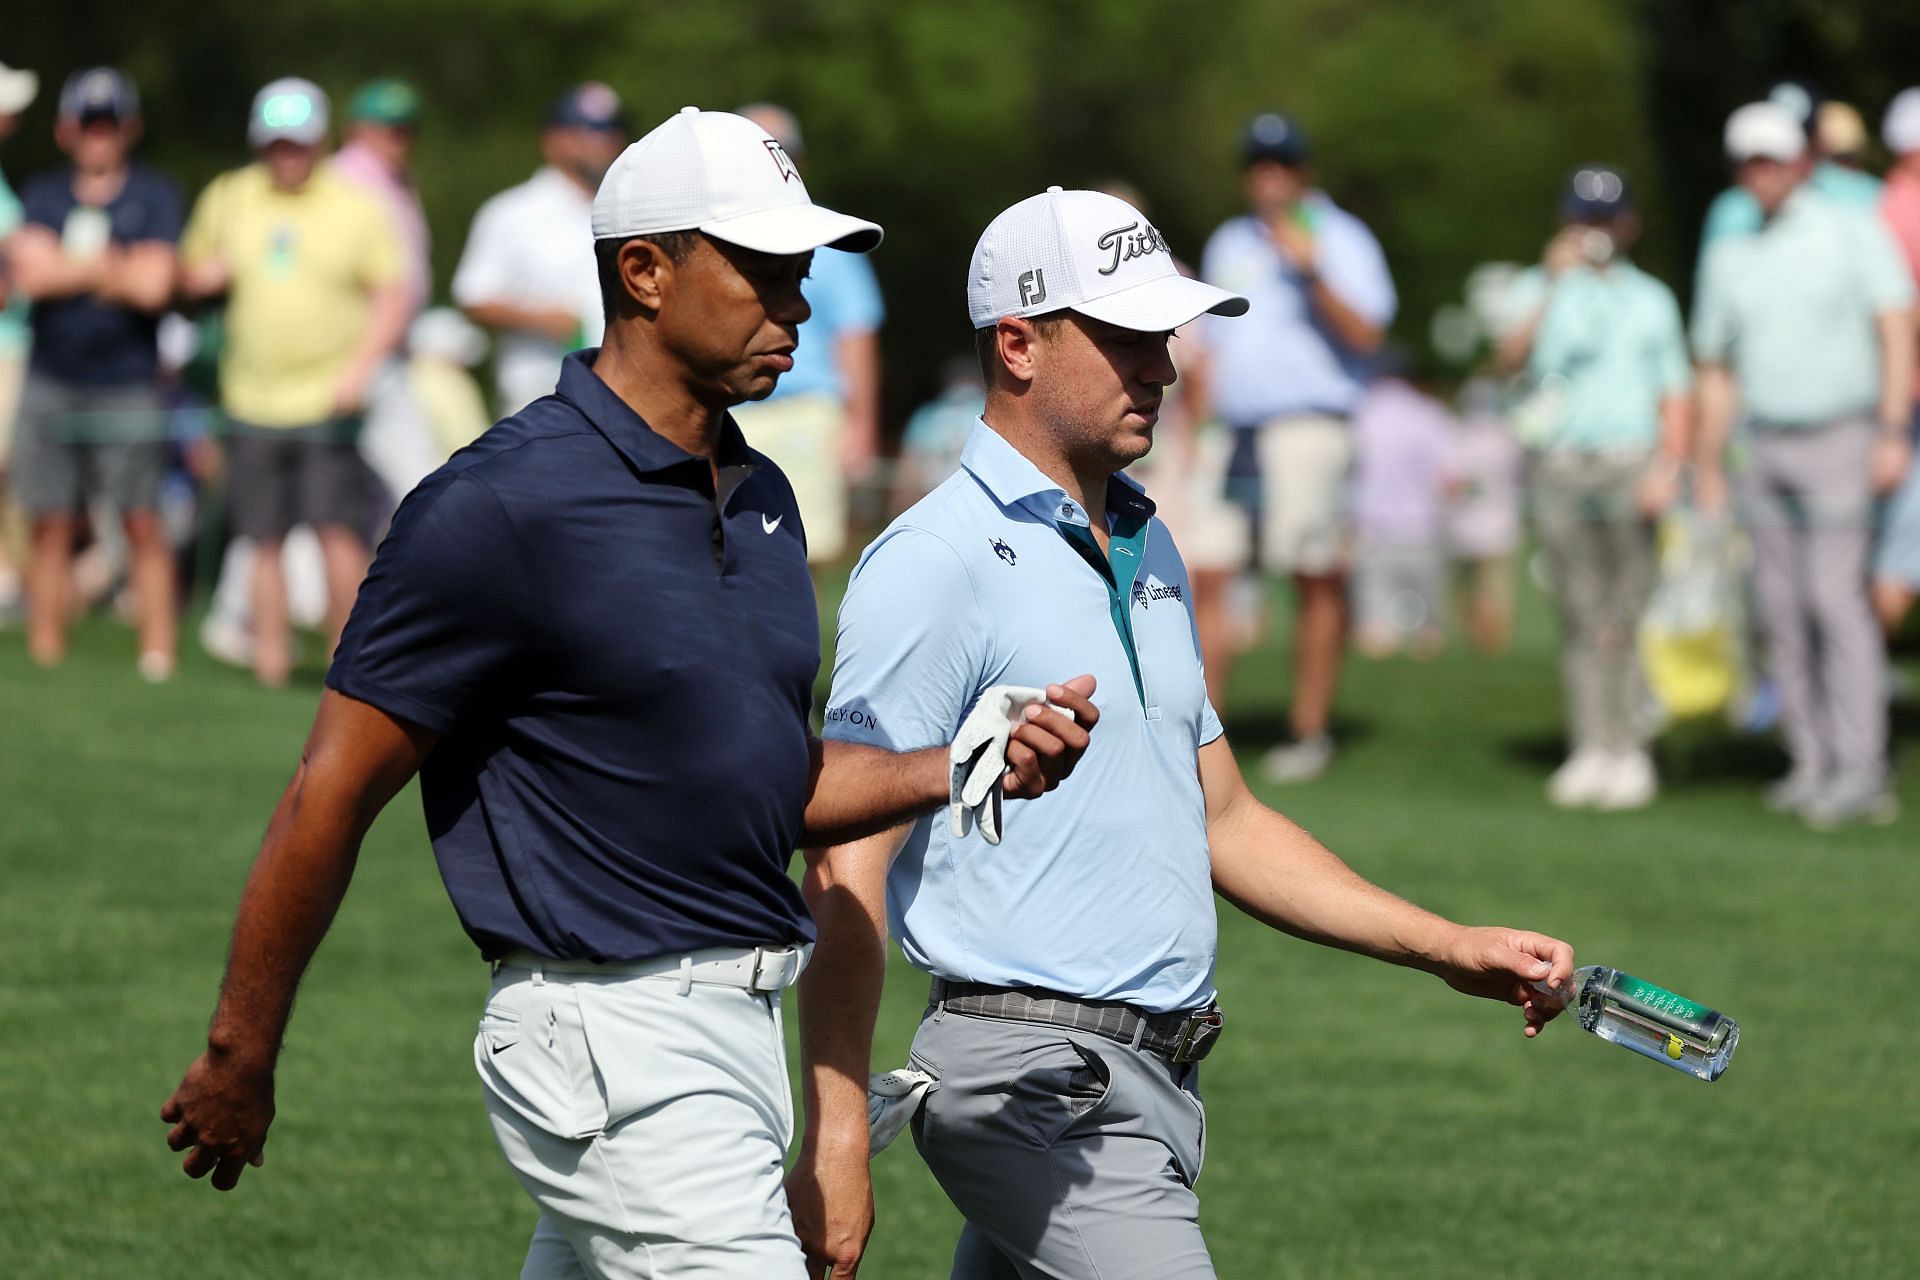 Tiger Woods and Justin Thomas at The Masters - Preview Day 1 (Image via Gregory Shamus/Getty Images)